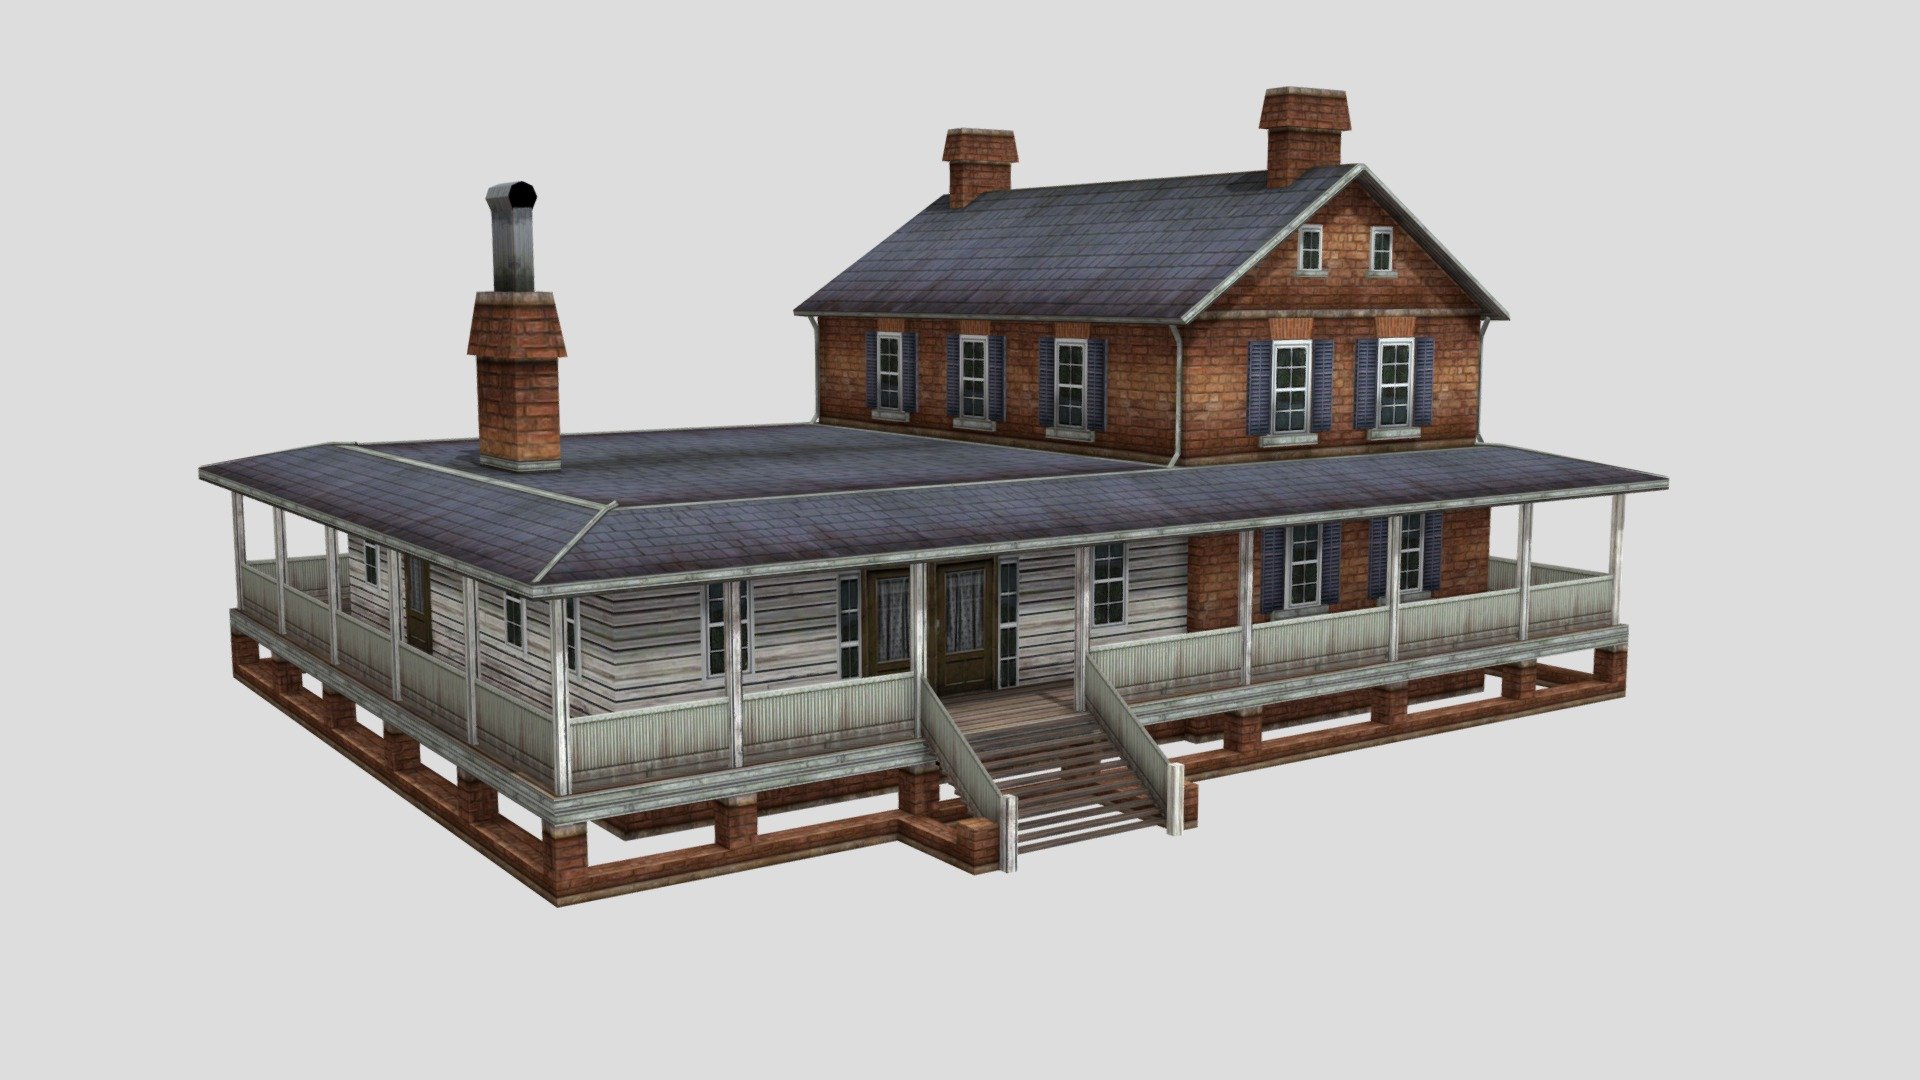 Old Farm House
The model has an optimized low poly mesh with the greatest possible number of simplifications that do not affect photo-realism but can help to simplify it, thus lightening your scene and allowing for using this model in real-time 3d applications.

Real-world accurate model.  In this product, all objects are ERROR-FREE and All LEGAL Geometry. Subdivisions are not required for this product.

Perfect for Architectural, Product visualization, Game Engine, and VR (Virtual Reality) No Plugin Needed.

Format Type




3ds Max 2017 (standard shader)

FBX

OBJ

3DS

Texture

1 Diffuse texture used only. No other textures.

You might need to re-assign textures map to model in your relevant software - Old Farm House - Buy Royalty Free 3D model by luxe3dworld 3d model